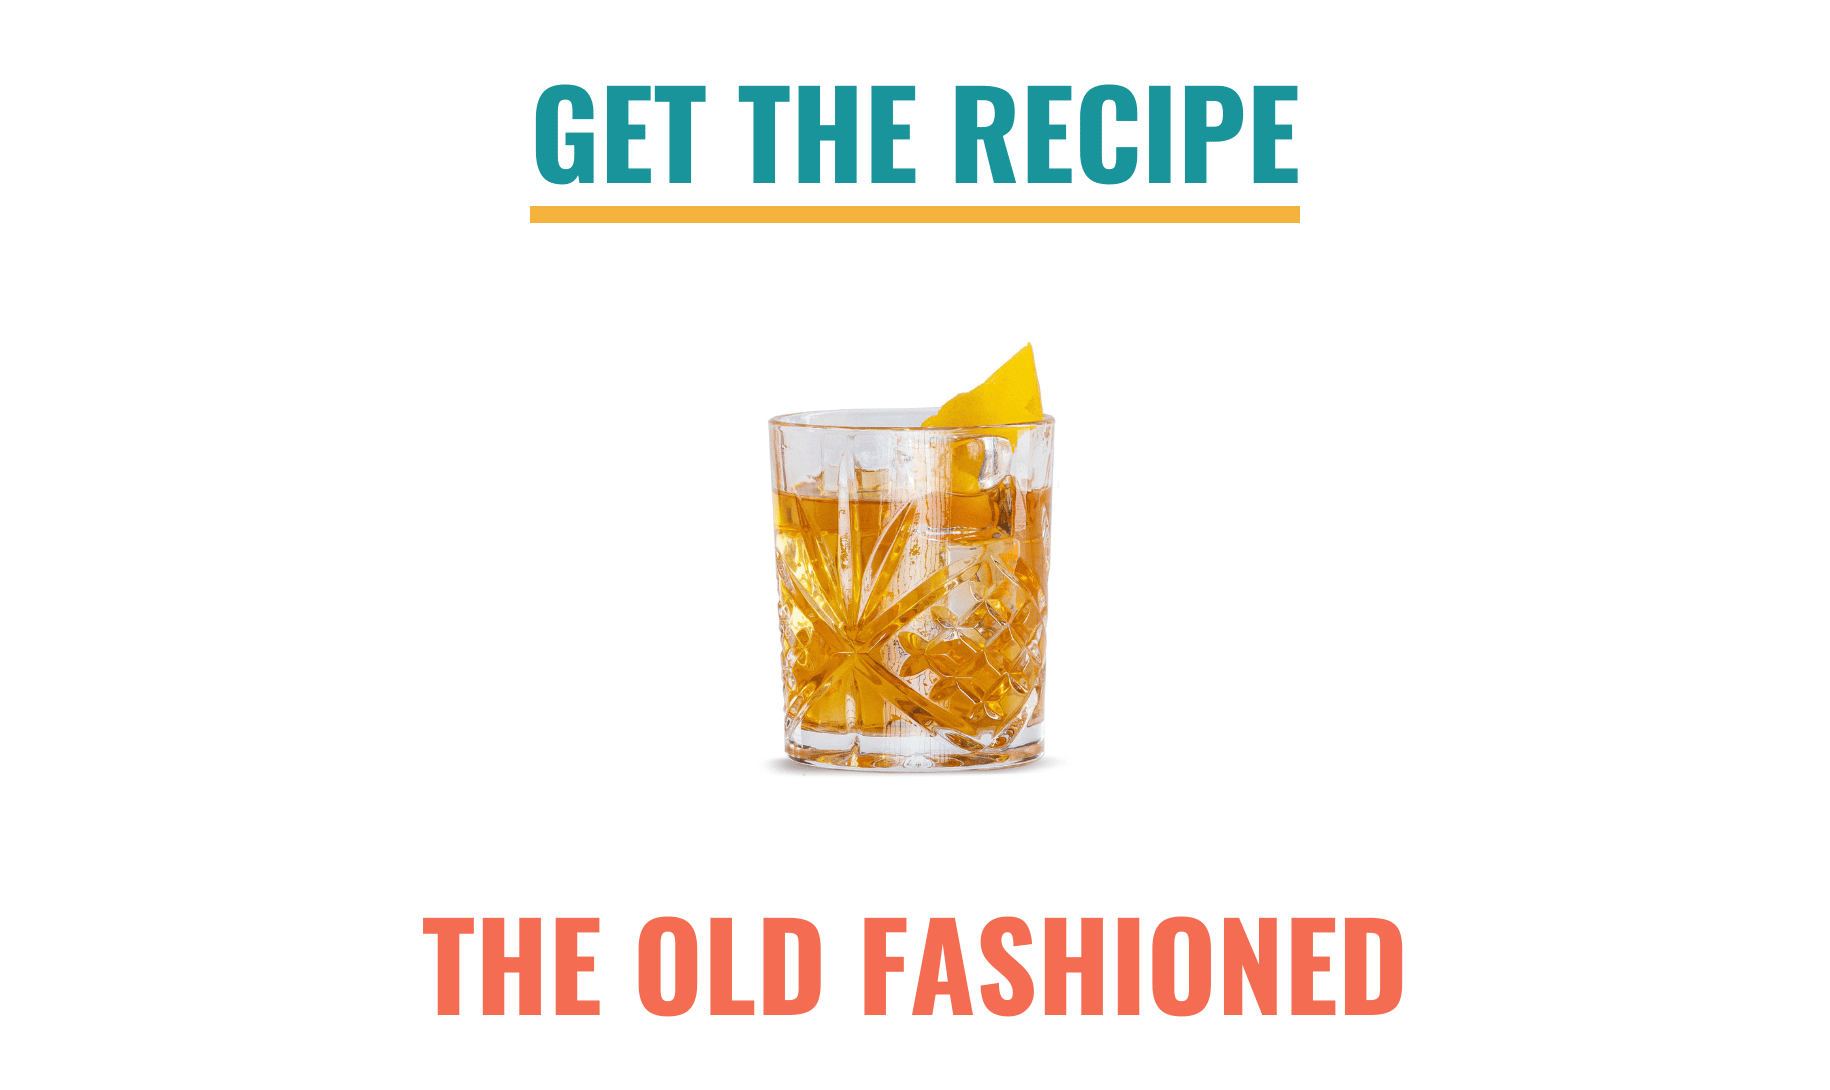 Get the old fashioned recipe